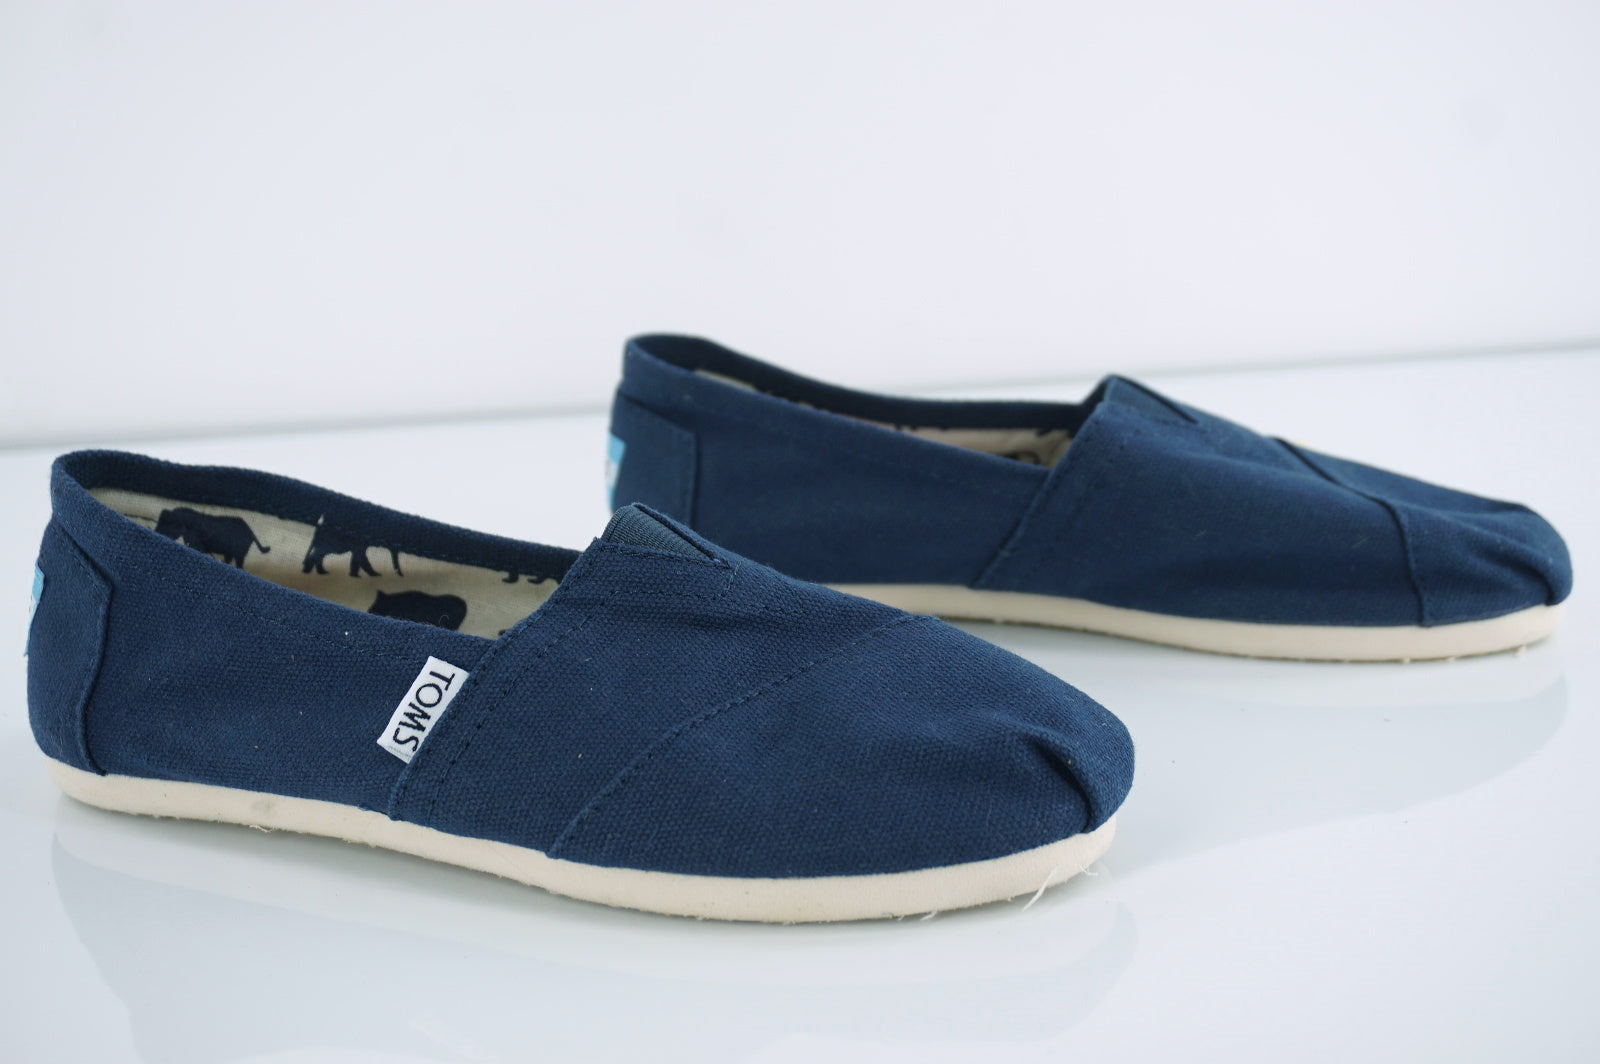 Toms Classic Canvas Womens Shoes Slip On Navy Blue Size 6 New